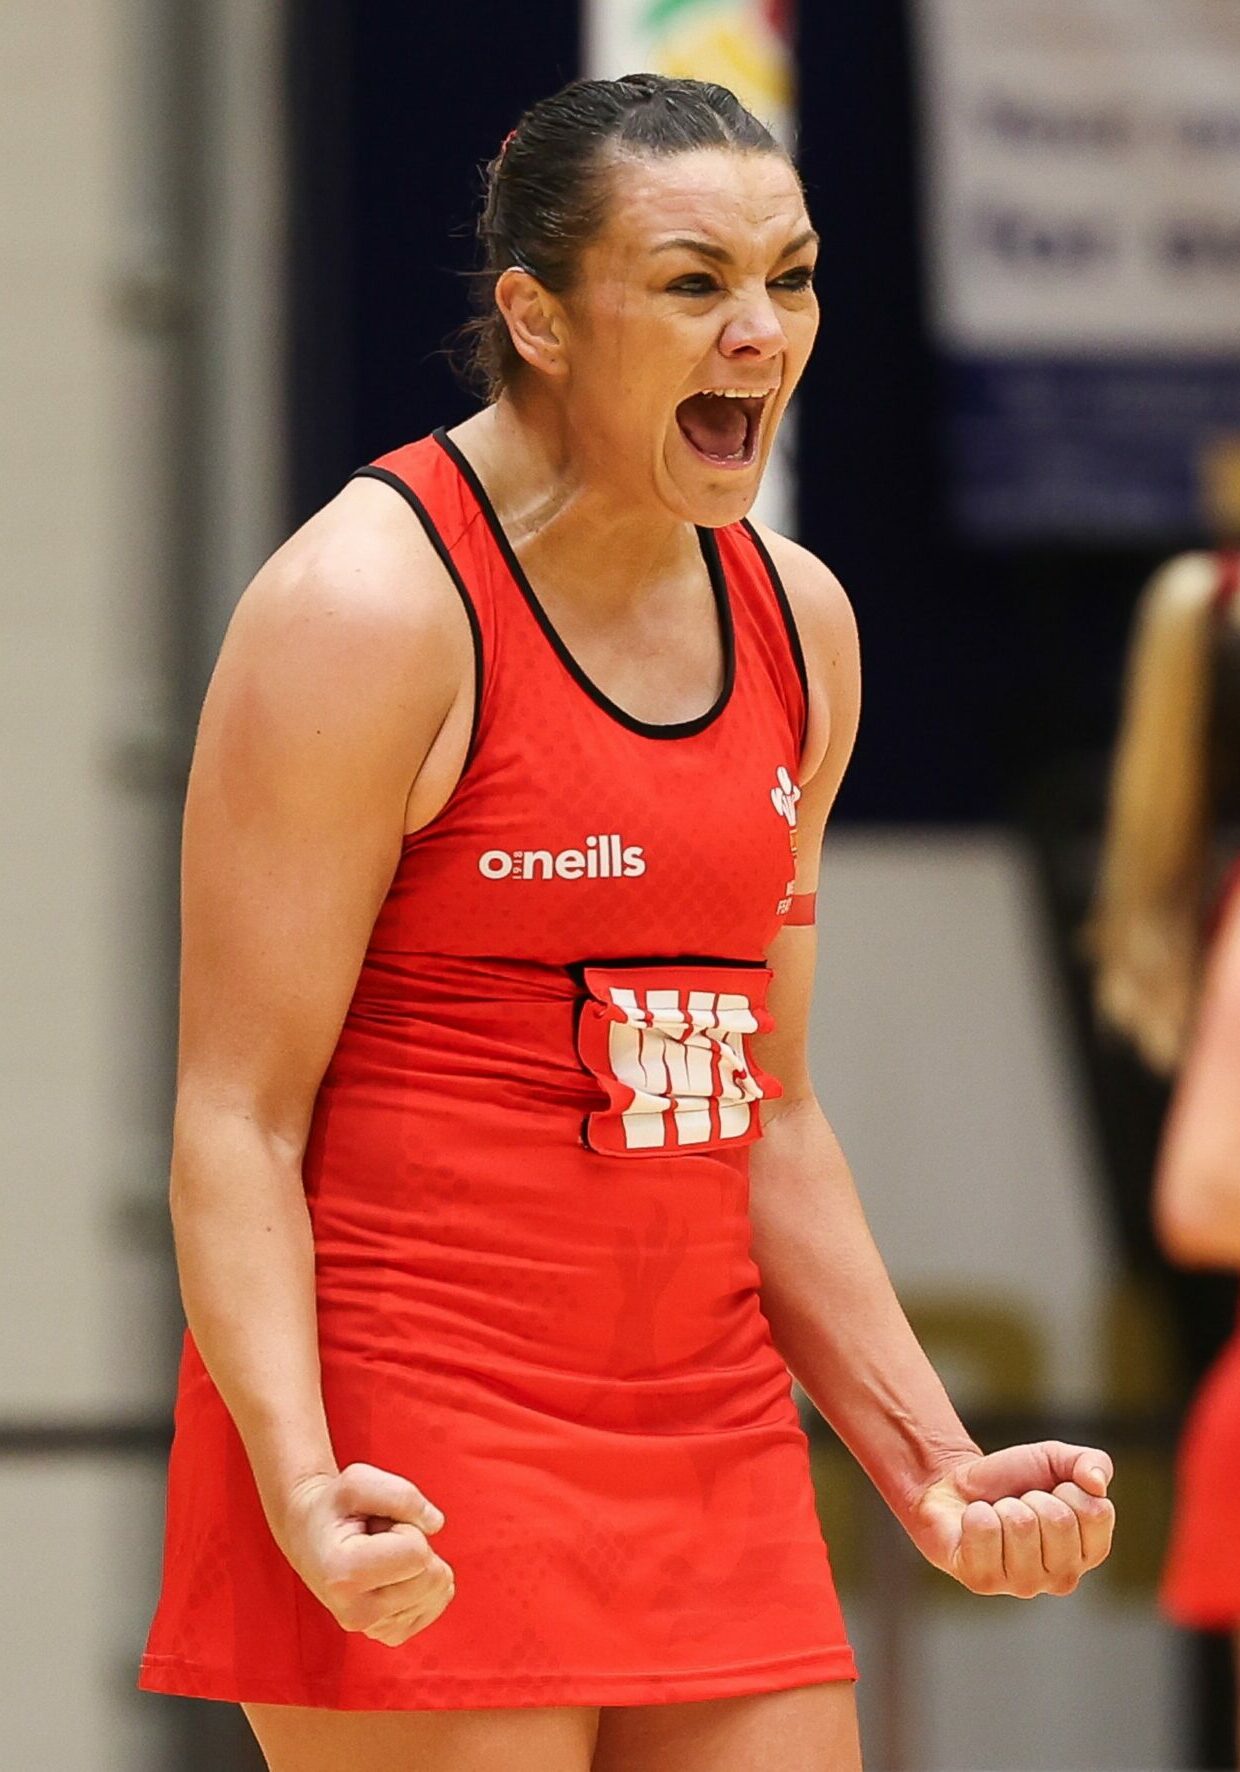 10.01.24 - Welsh Feathers v Uganda, International Netball Series - Nia Jones of Welsh Feathers celebrates at the end of the match